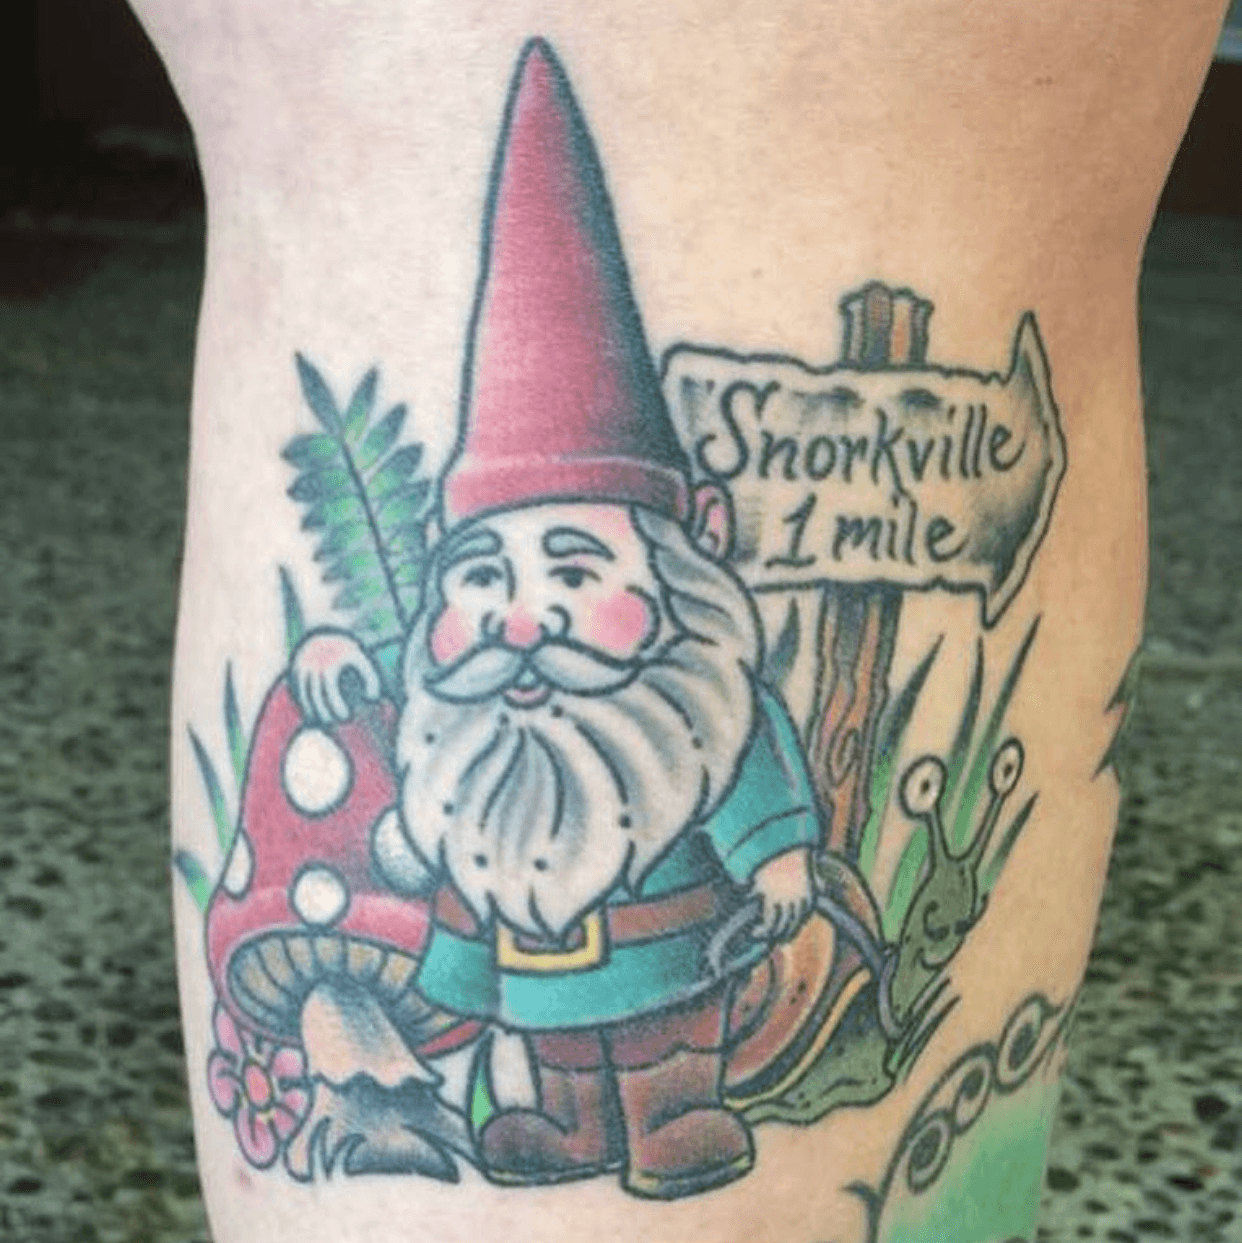 Gnome on a bad trip Paul Nycz Iron Heart Tattoo Des Moines Iowa   rtraditionaltattoos